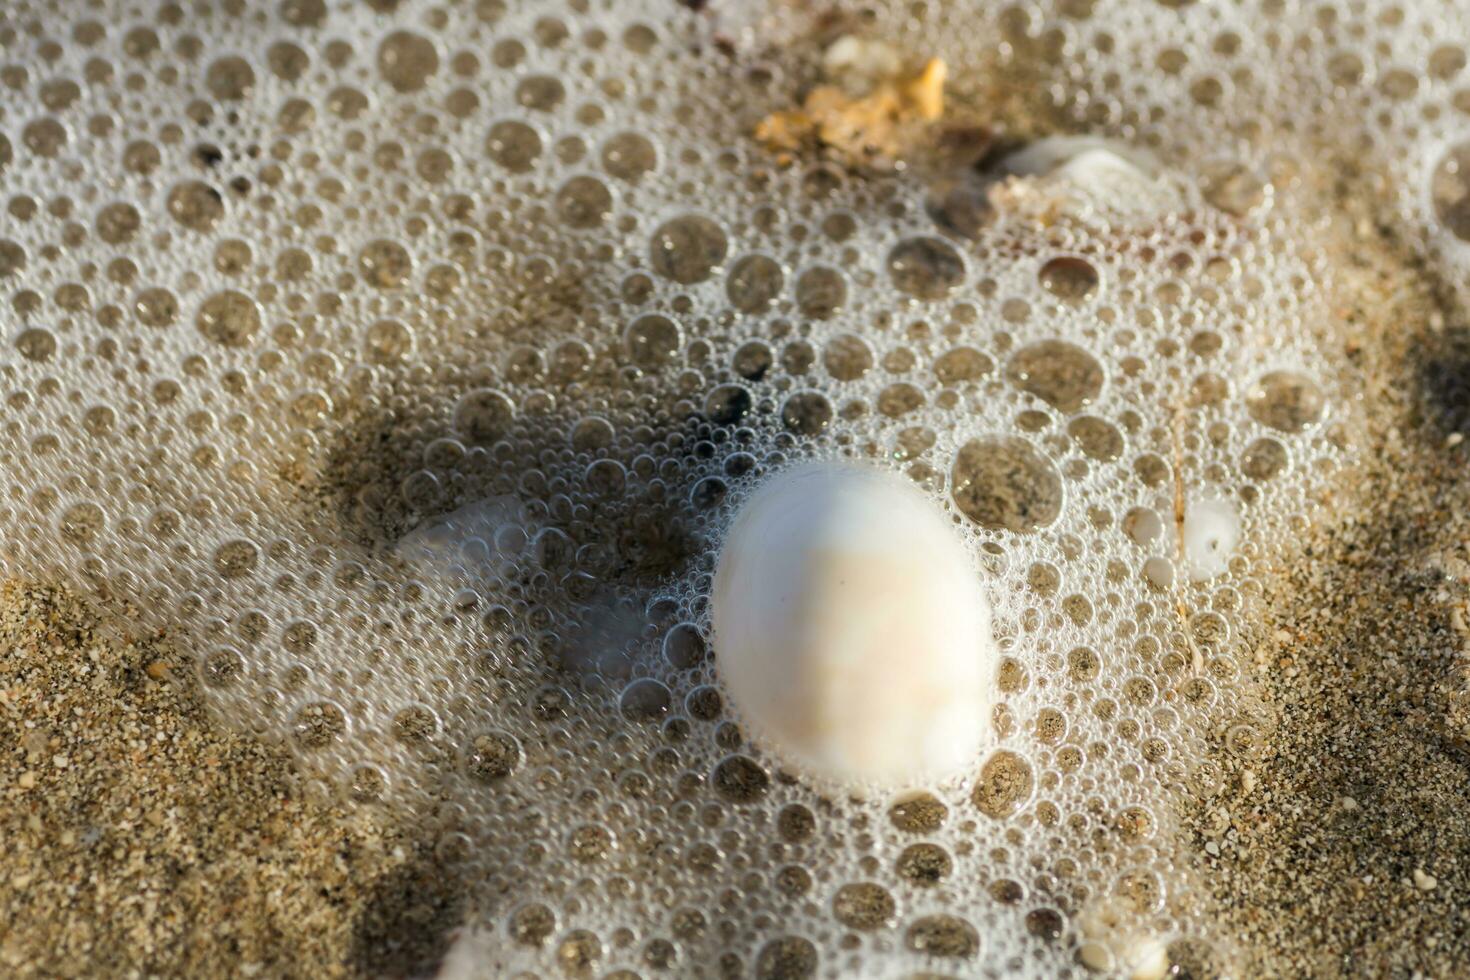 Frog Egg Stock Photos, Images and Backgrounds for Free Download